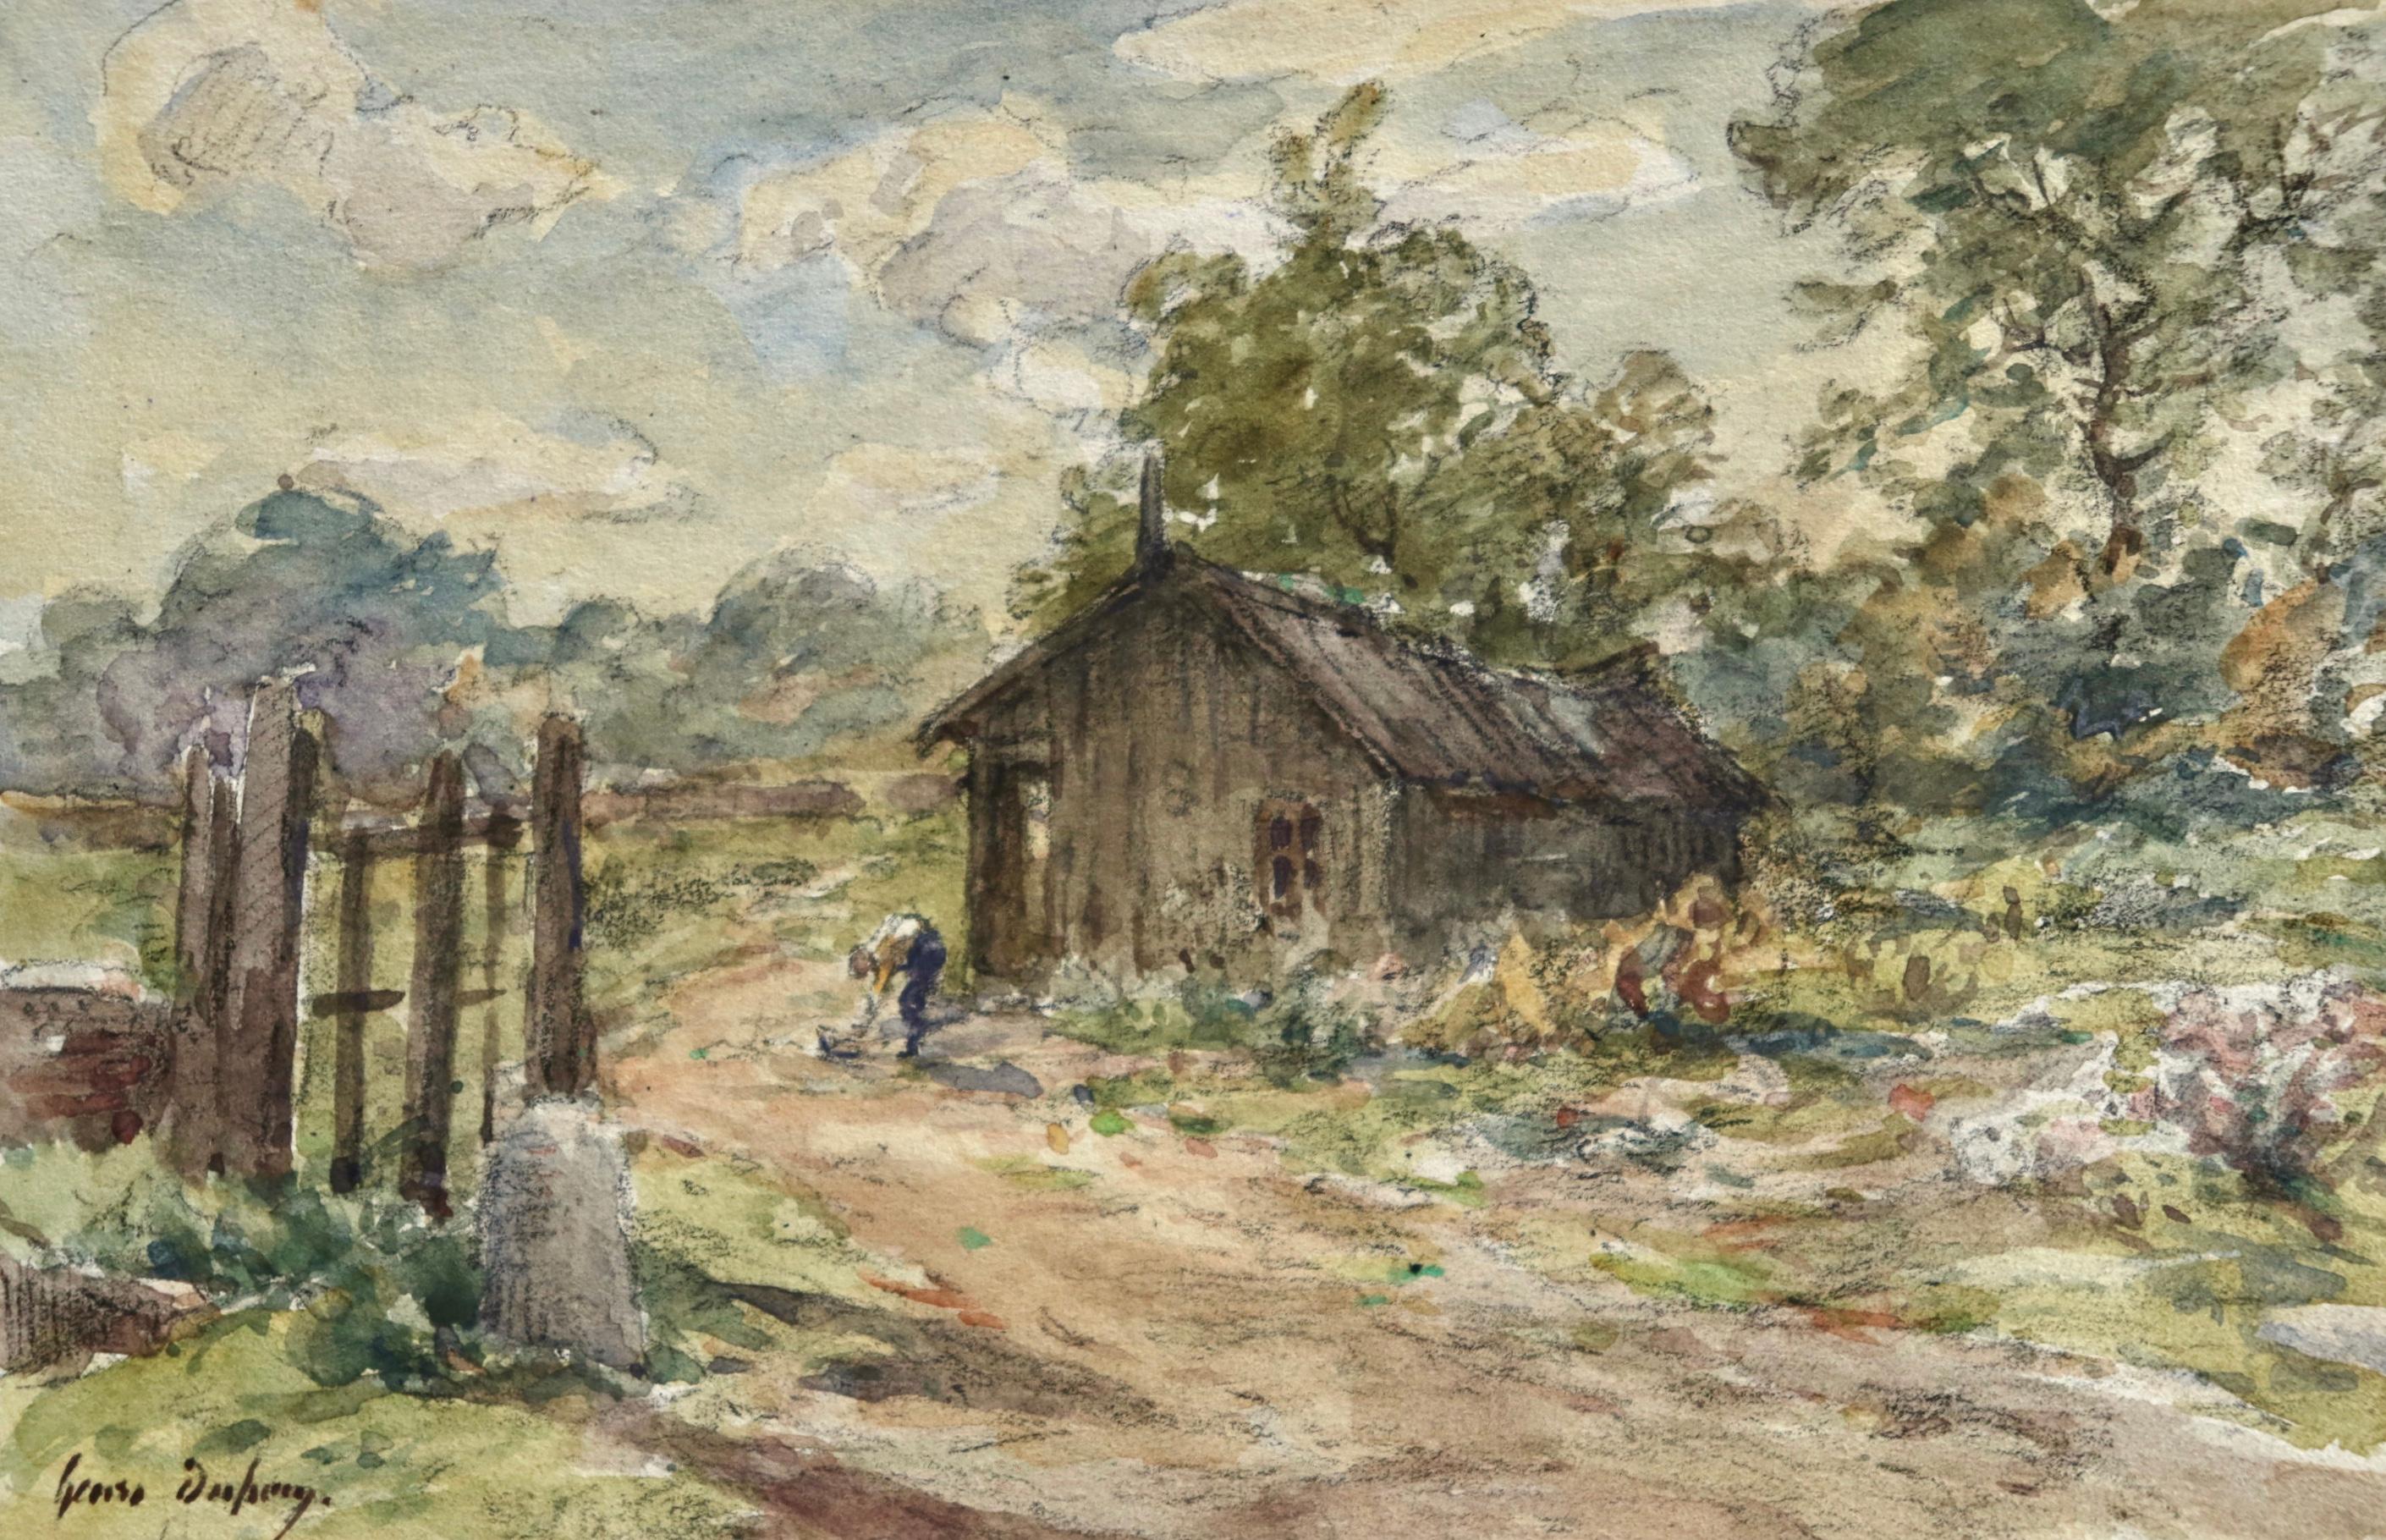 Watercolour on paper circa 1907 by French Impressionist painter Henri Duhem depicting a a man standing beside a small wooden house in a rural French landscape. Signed lower left. This piece is not currently framed but a suitable frame can be sourced